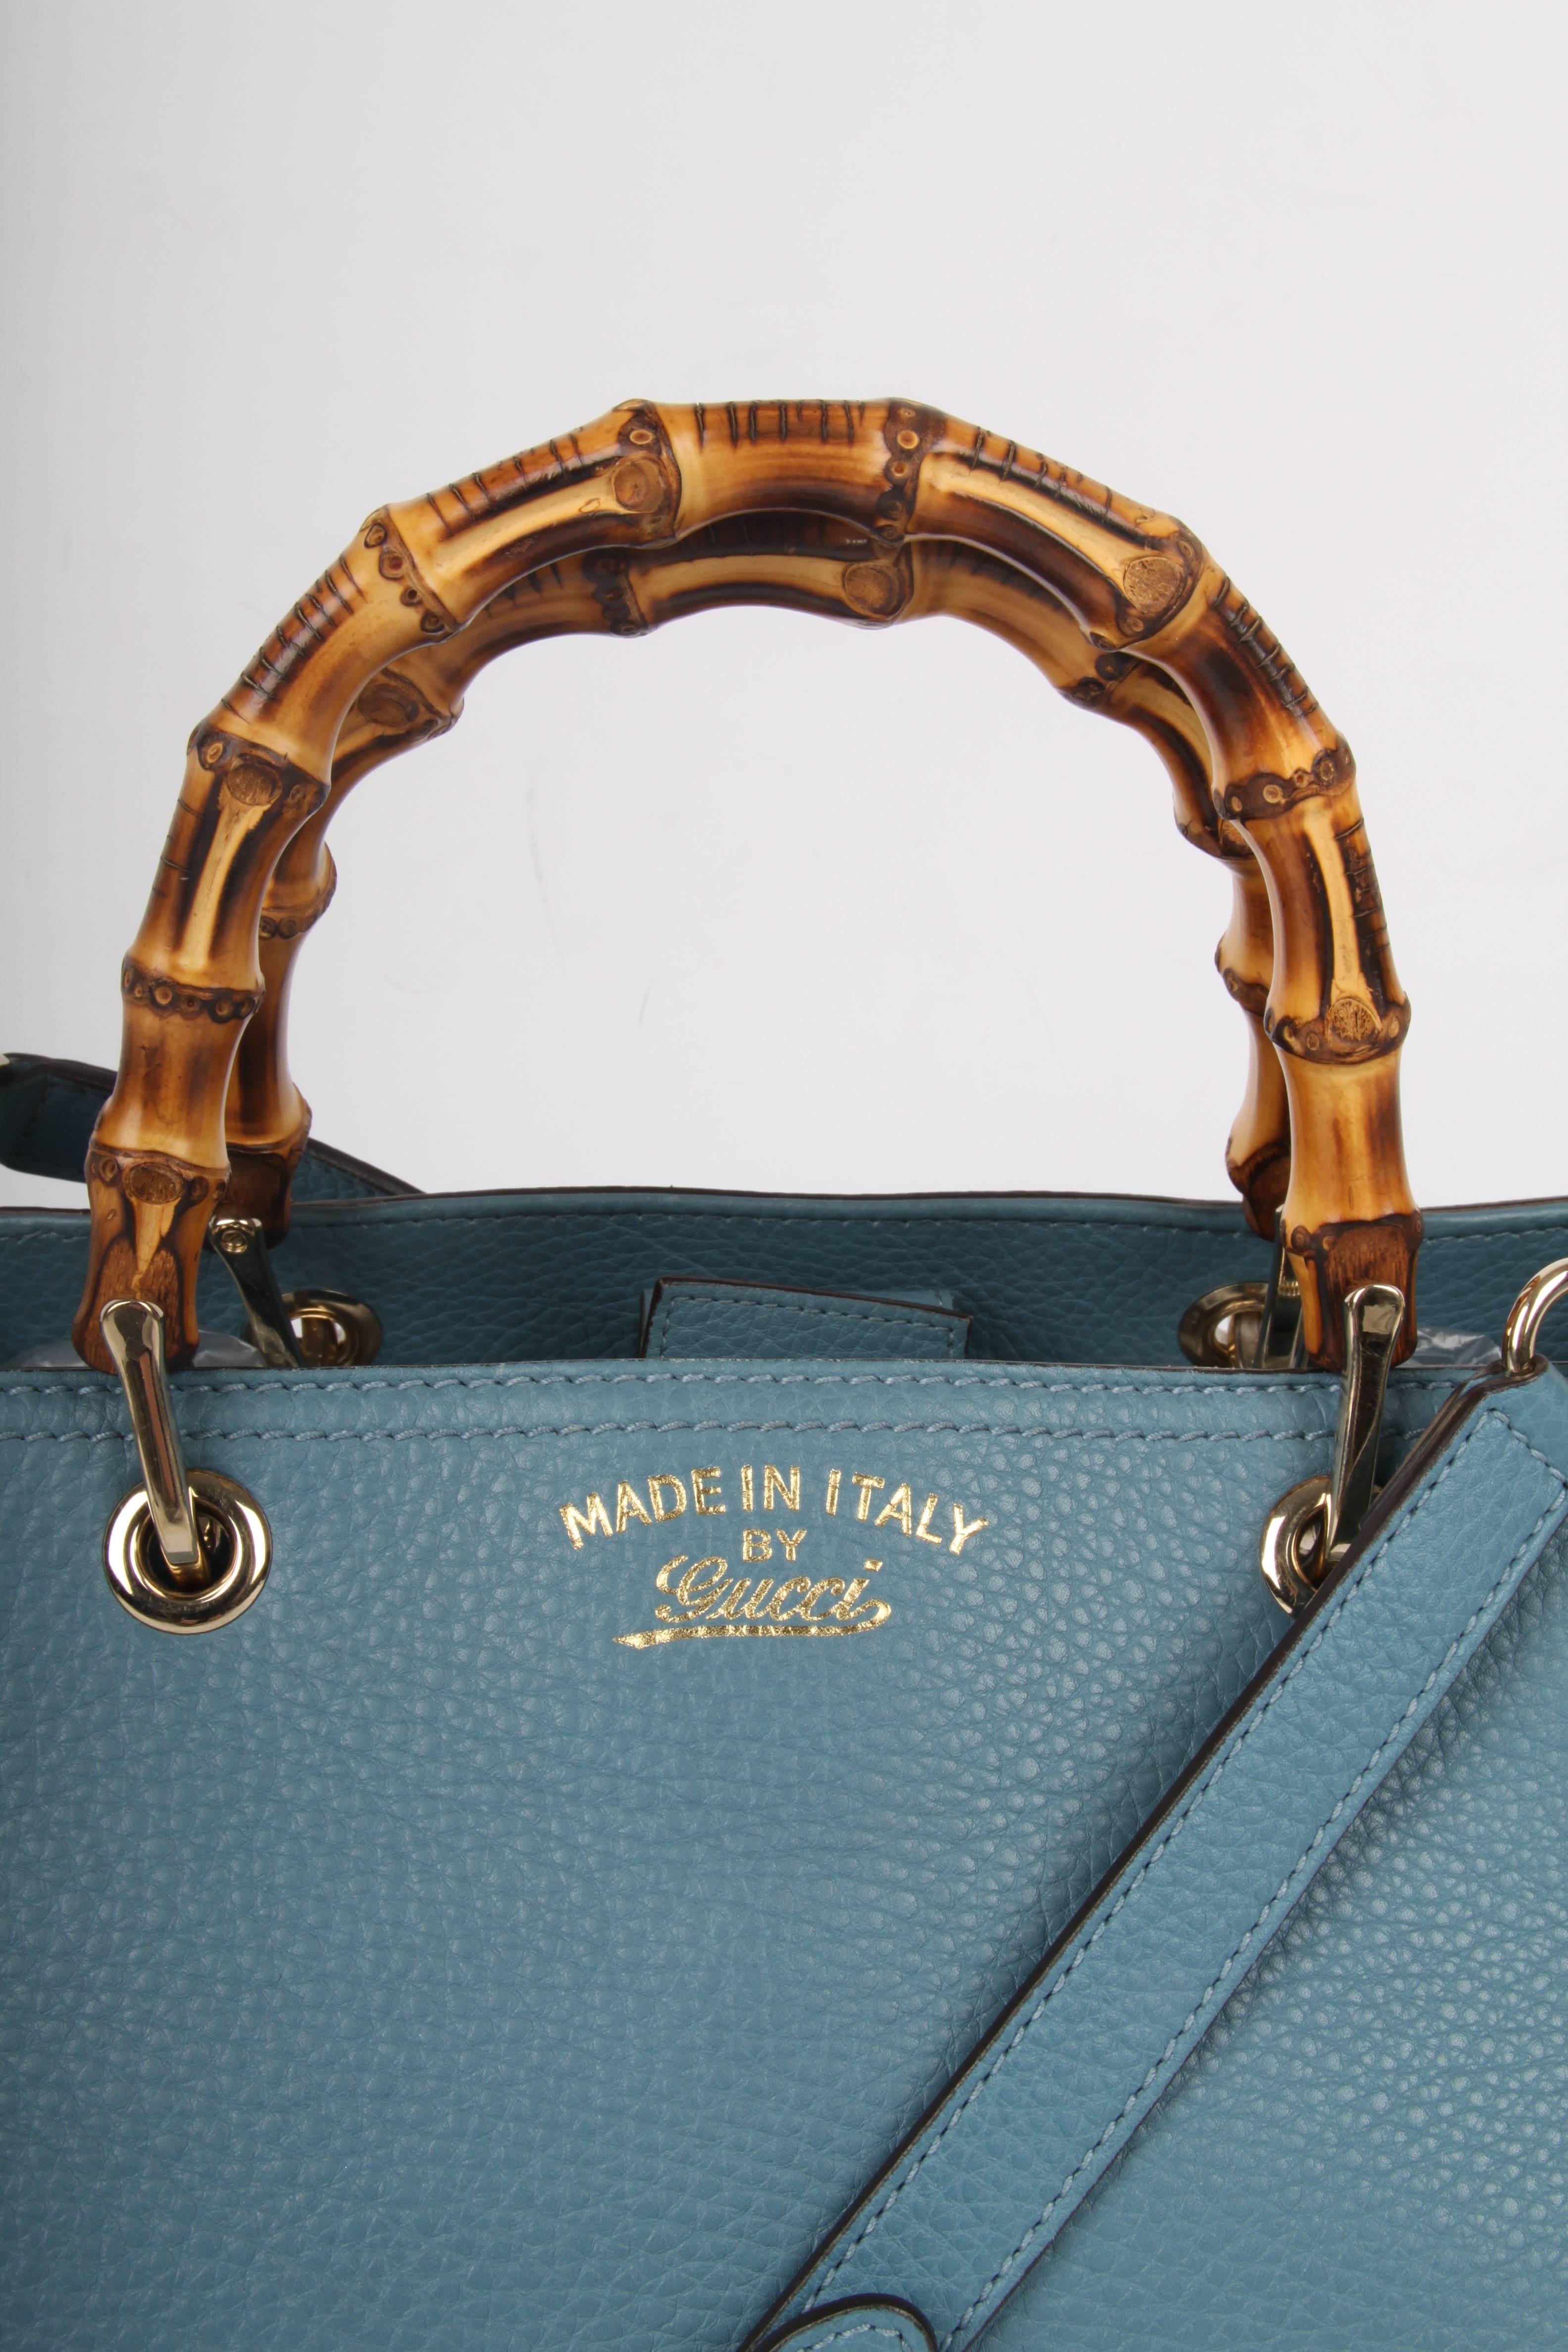 The iconic Bamboo Shopper by Gucci in size M. Nice!

On top two characteristic bamboo handles. Gucci uses a patented method to bend and fixate the bamboo, so it can be attached to the bag. The bamboo gives a sturdy look to this rather chic bag. 

A